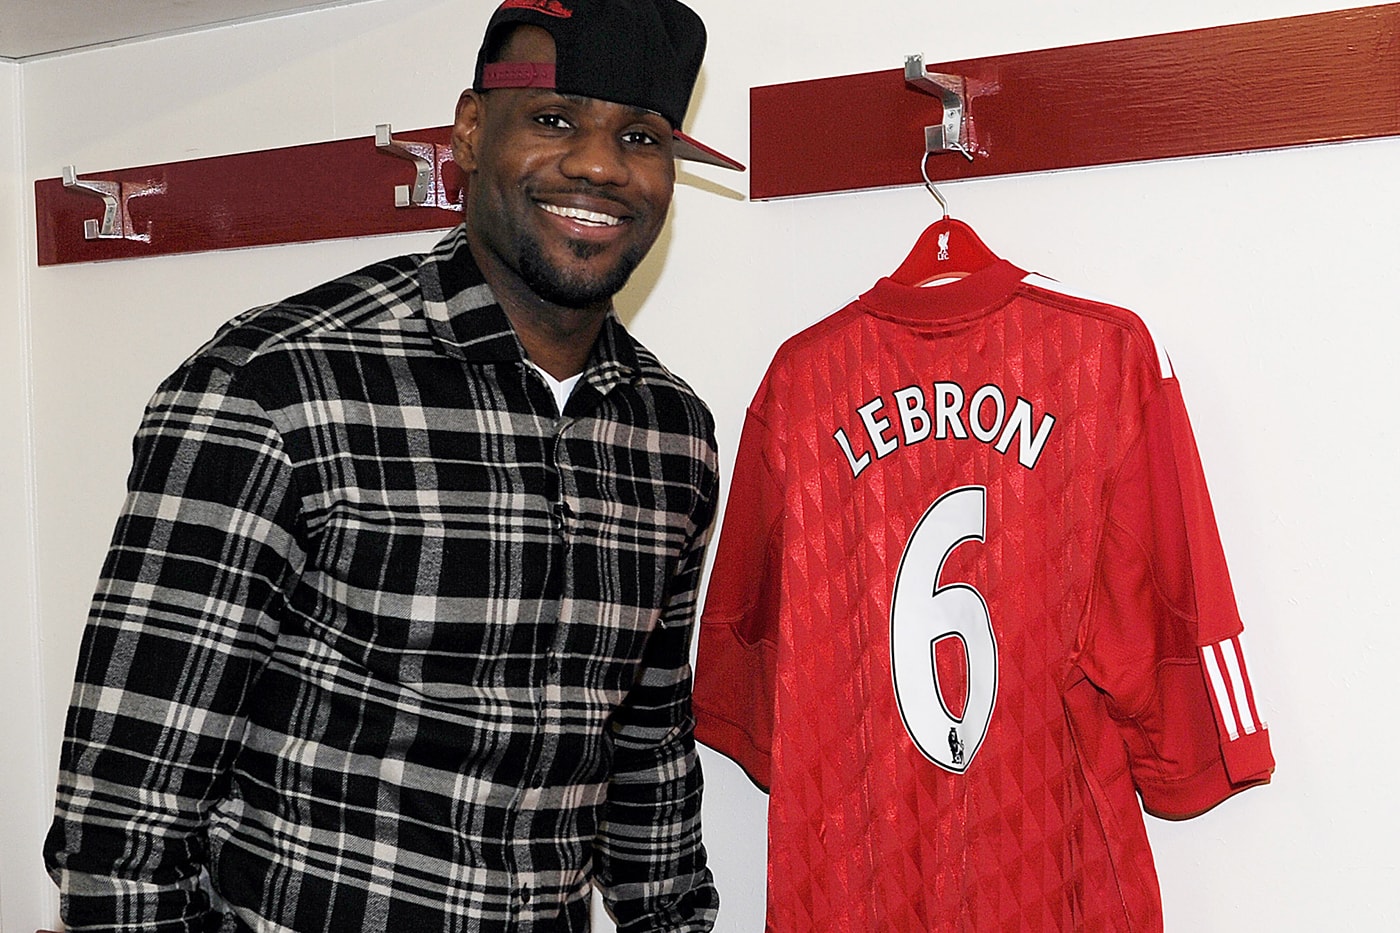 Nike Announces a Product Line With LeBron James and Liverpool FC Premier League New balance Fenway Sports Group Jordan PSG 2 percent stake kit chairman tom werner seven or eight products partnership news